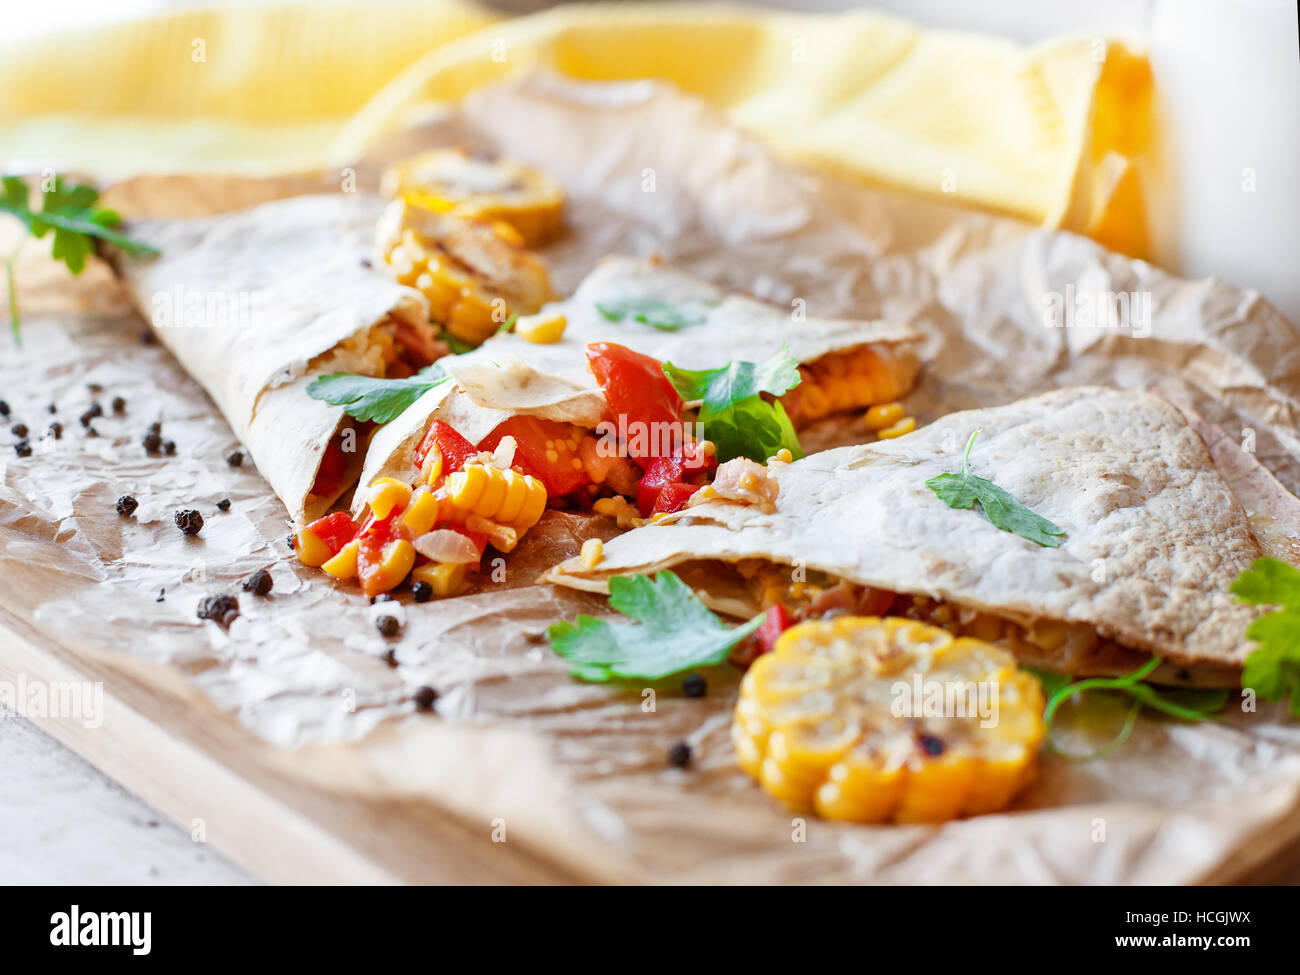 Mexican Quesadilla wrap with vegetables, corn, sweet pepper and sauces on the parchment and table. horizontal view. Stock Photo